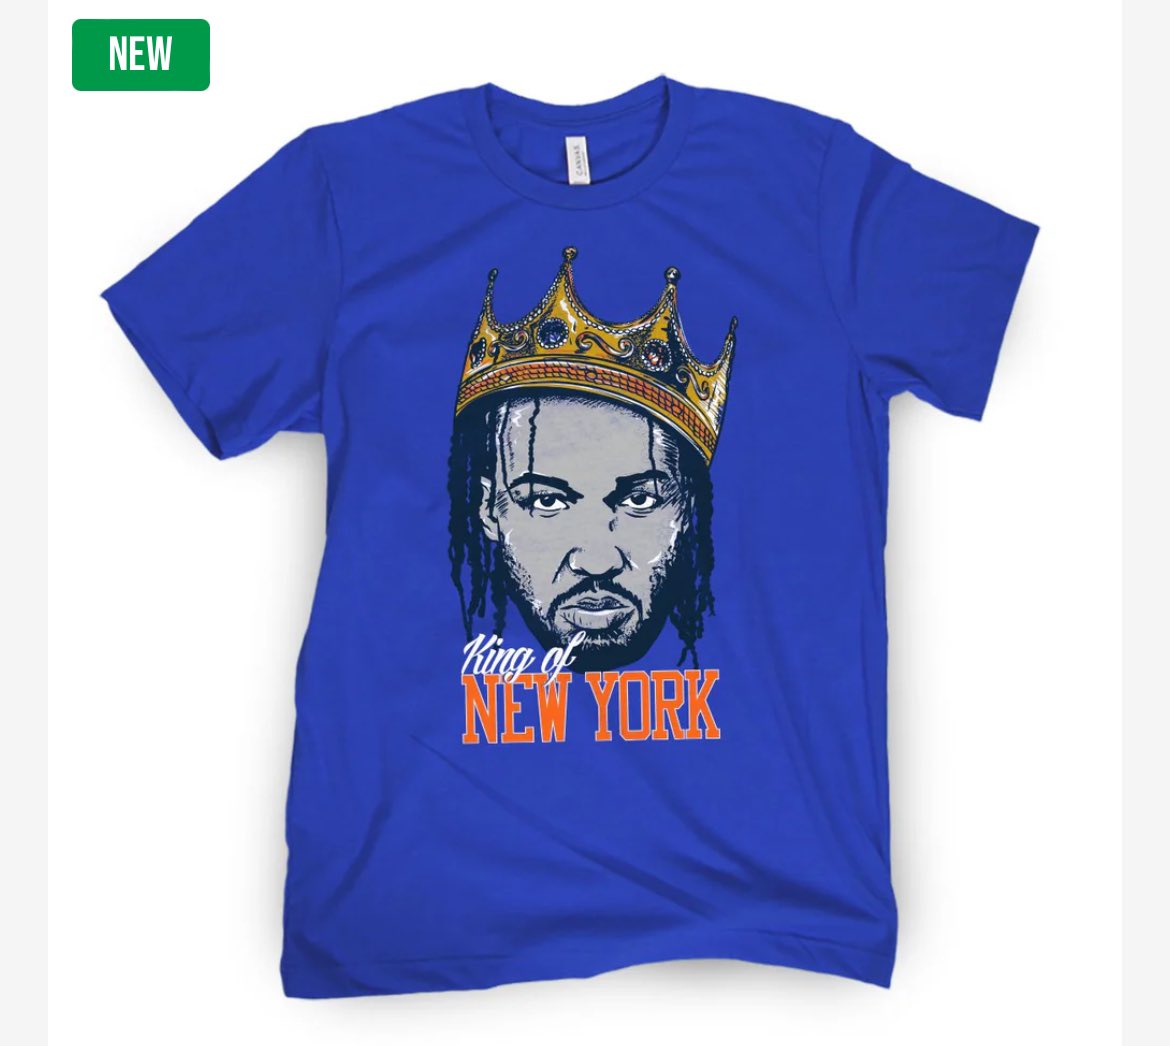 THE KING OF NEW YORK AND NOW PHILADELPHIA store.barstoolsports.com/products/jb-ny…